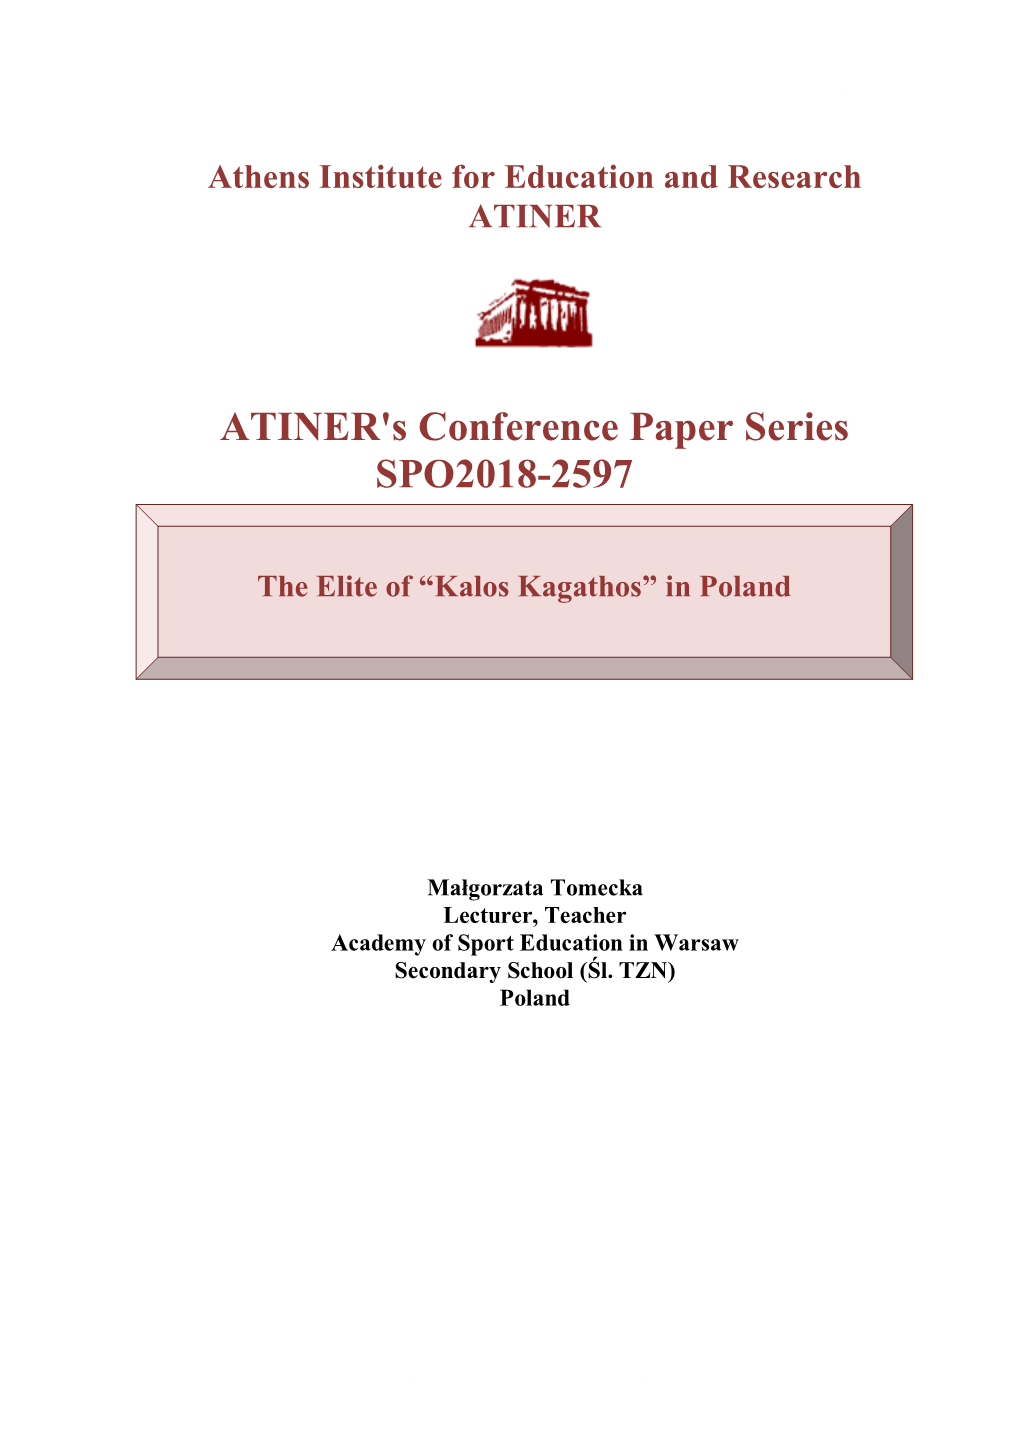 ATINER's Conference Paper Series SPO2018-2597